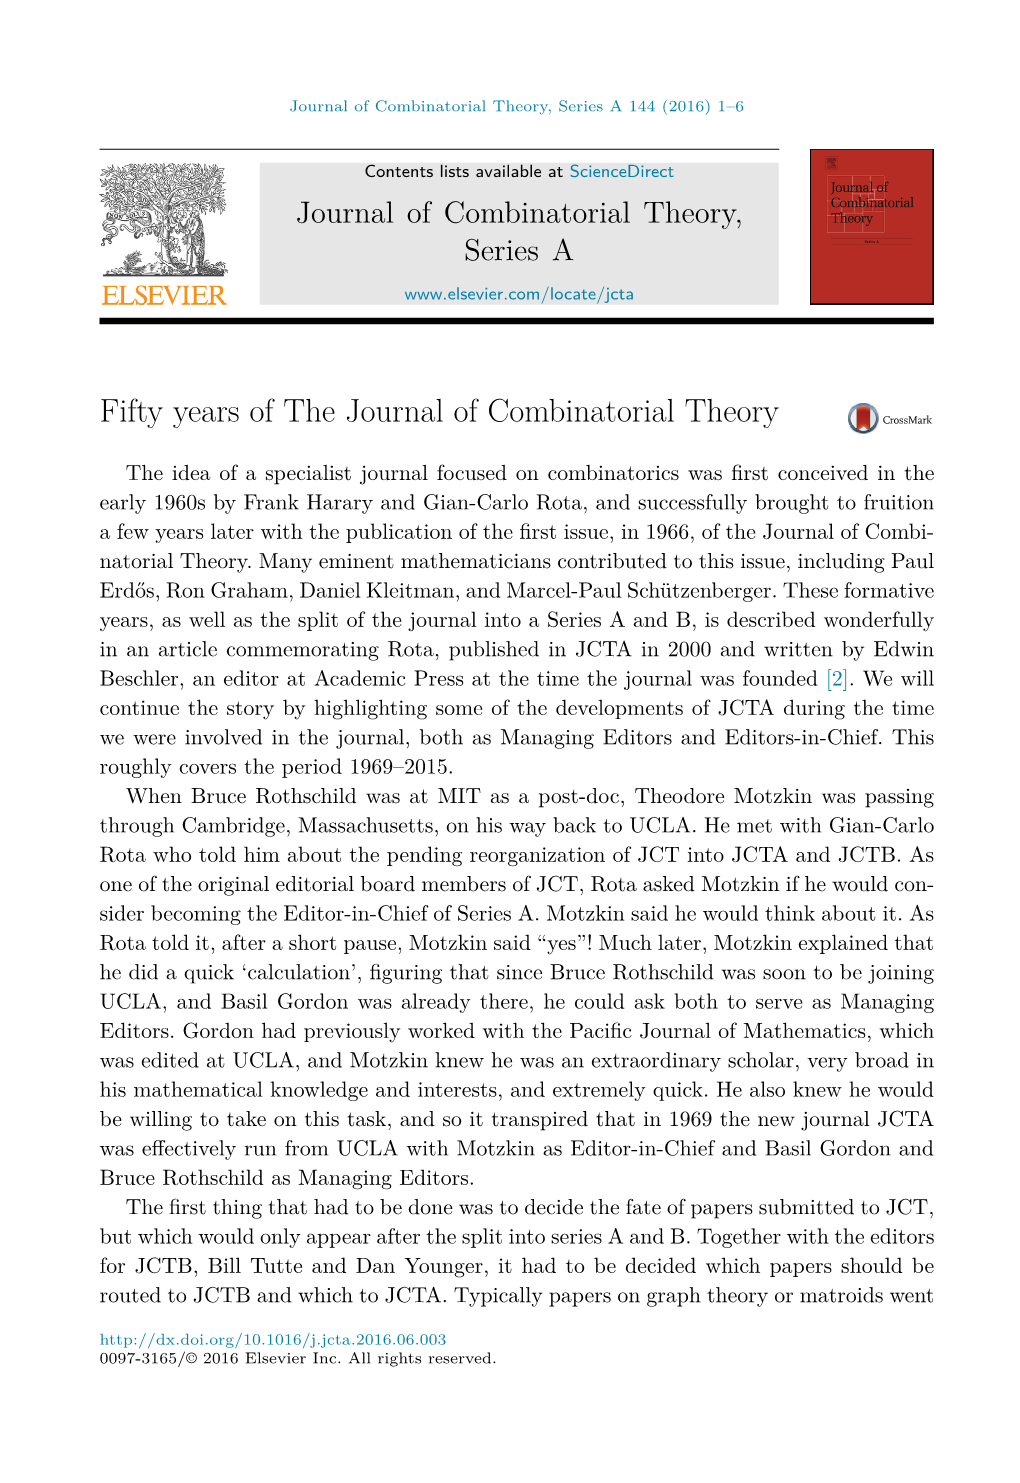 Fifty Years of the Journal of Combinatorial Theory